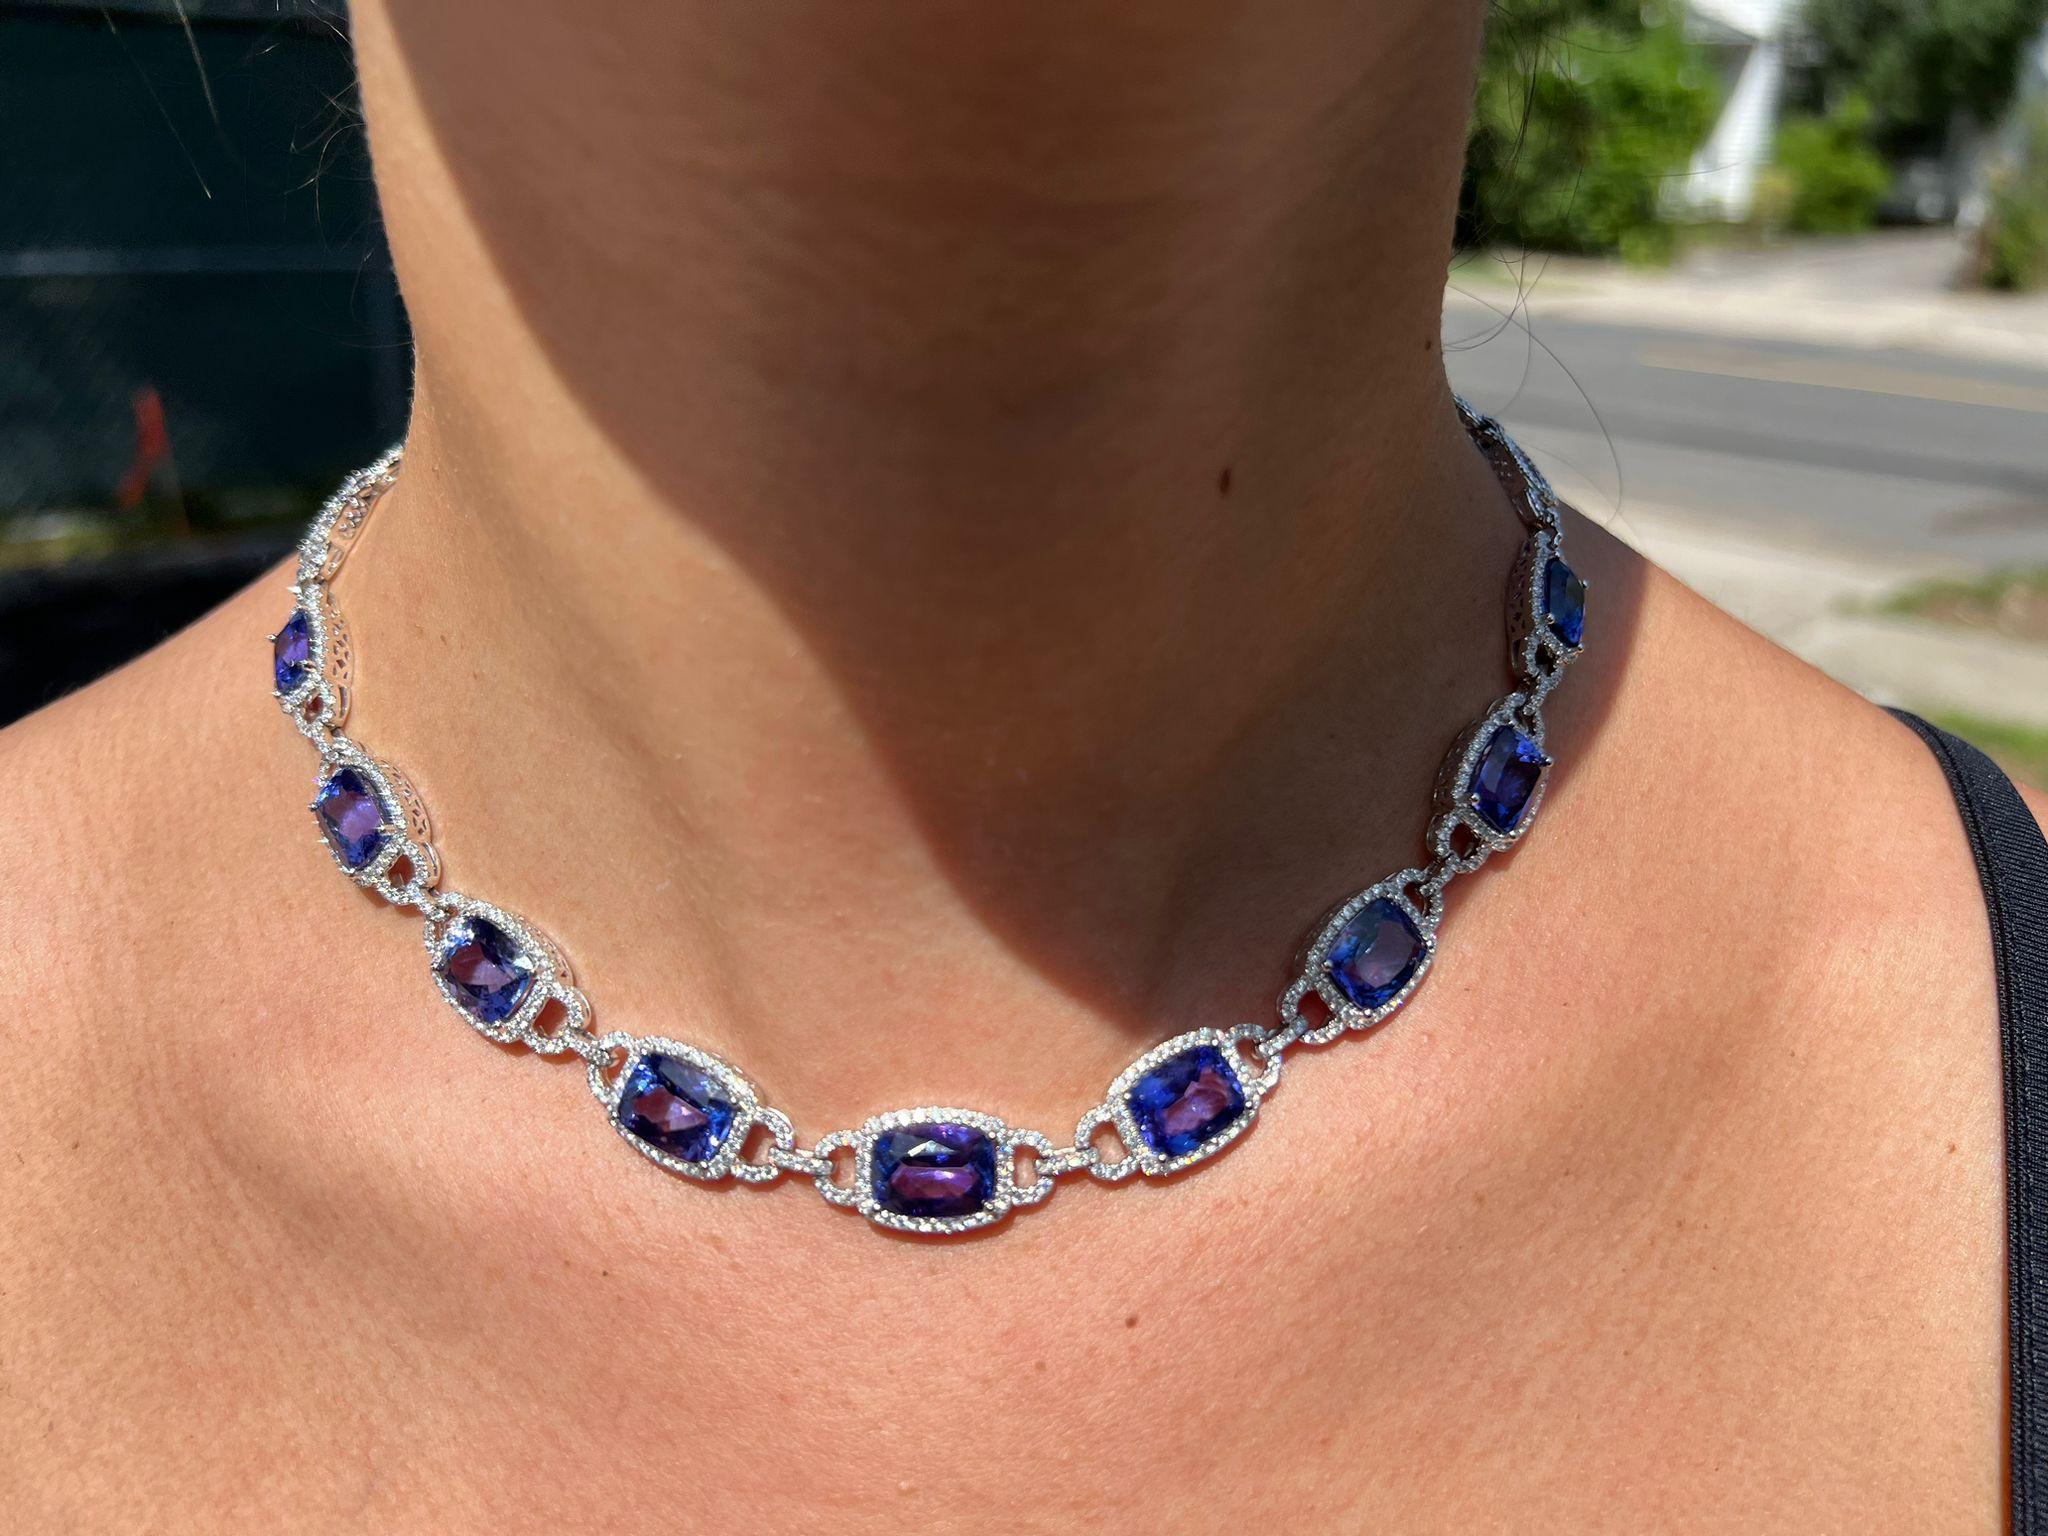  Indulge in the mesmerizing beauty of this exquisite 14 karat white gold necklace featuring a stunning cushion tanzanite pendant. Crafted with exceptional artistry, this necklace showcases the finest quality vivid AAA tanzanite weighing an